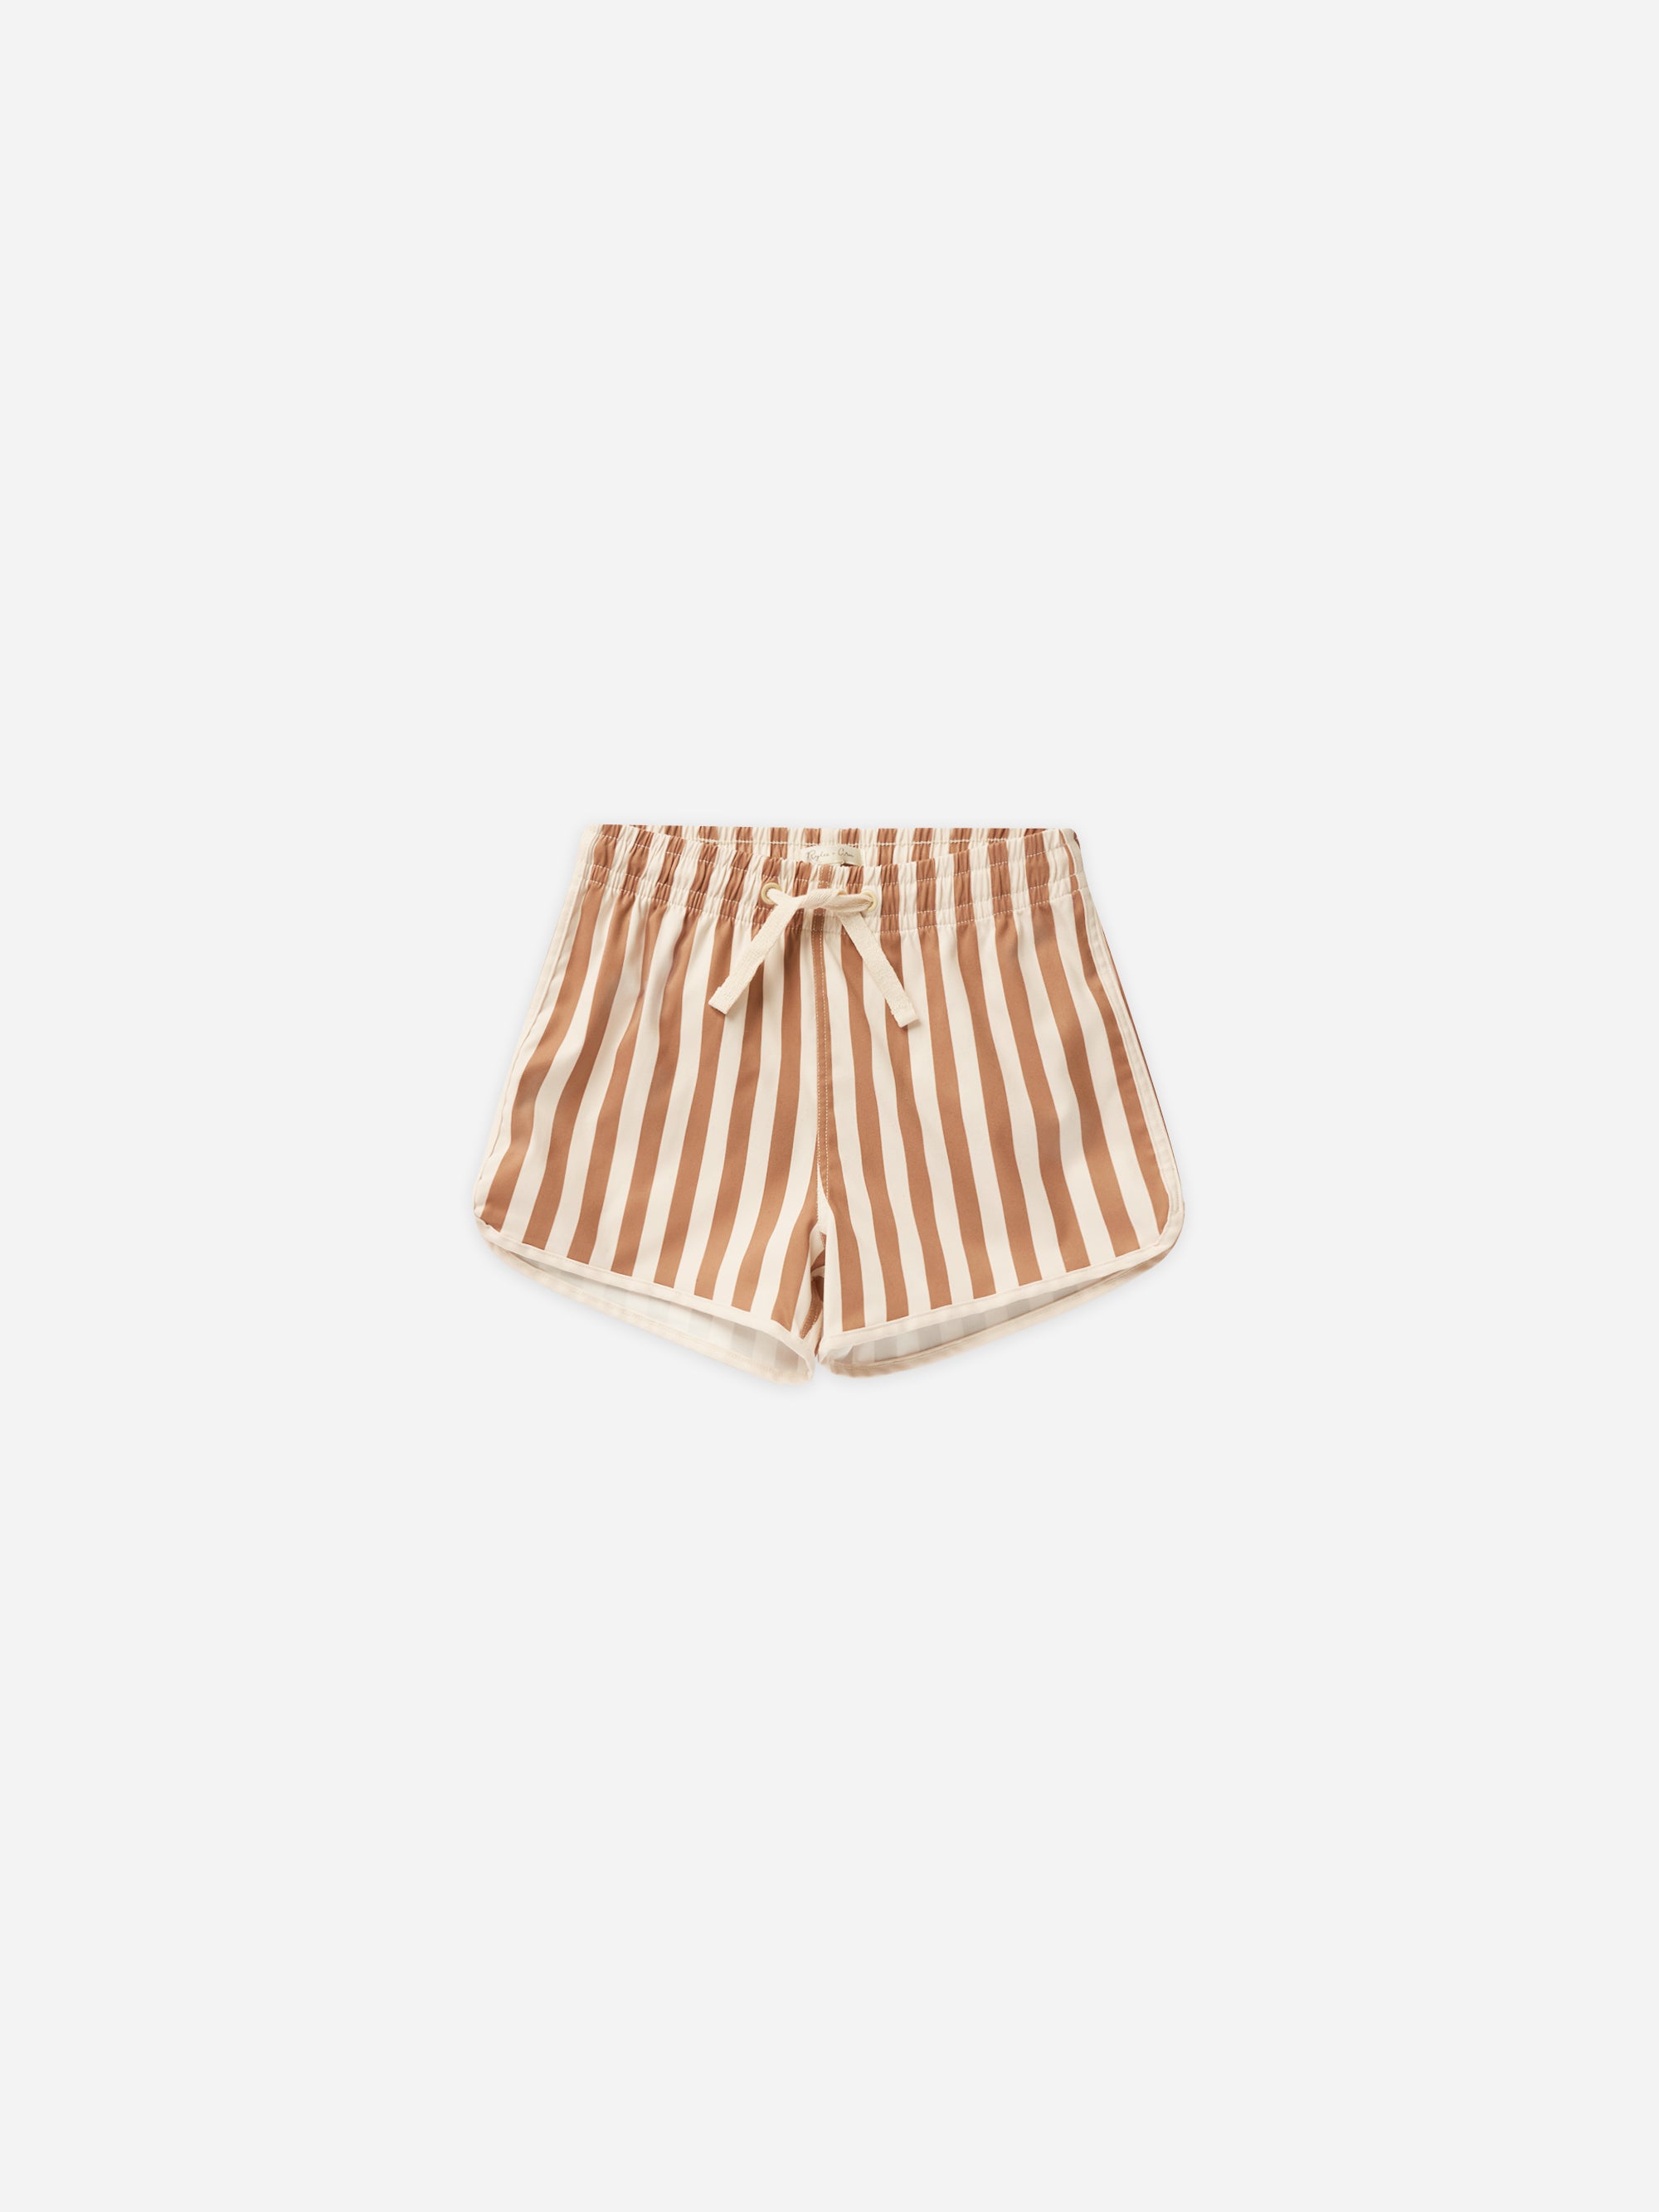 Swim Trunk || Clay Stripe - Rylee + Cru | Kids Clothes | Trendy Baby Clothes | Modern Infant Outfits |